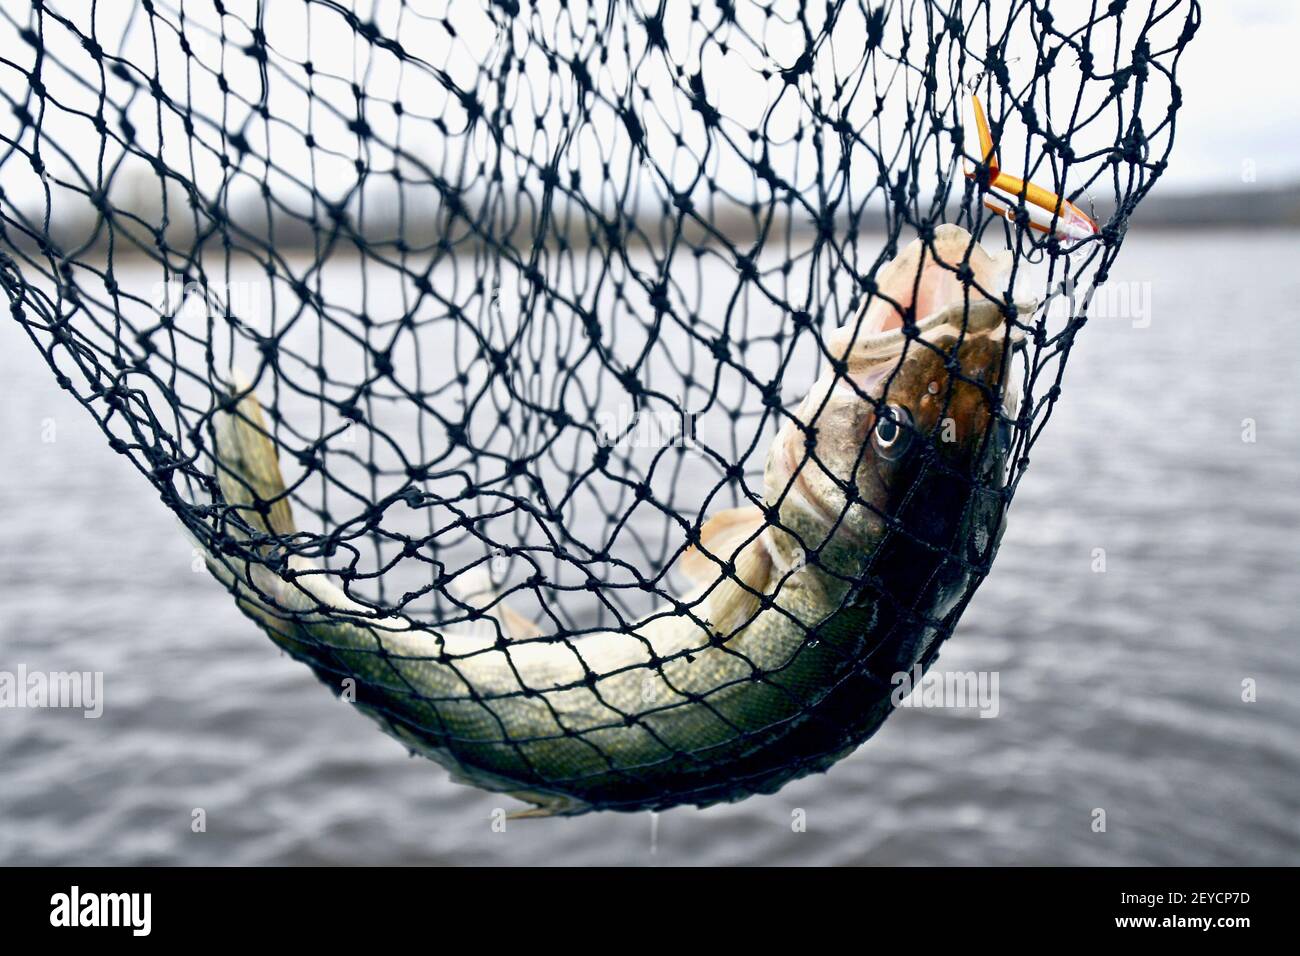 https://c8.alamy.com/comp/2EYCP7D/a-25-inch-walleye-caught-on-the-st-louis-river-saturday-near-duluth-by-chris-edquist-of-superior-fills-out-a-landing-net-edquist-used-a-jointed-orange-colored-crankbait-to-catch-the-fish-during-the-minnesota-fishing-opener-may-11-2013-photo-by-clint-austinduluth-news-tribunemctsipa-usa-2EYCP7D.jpg